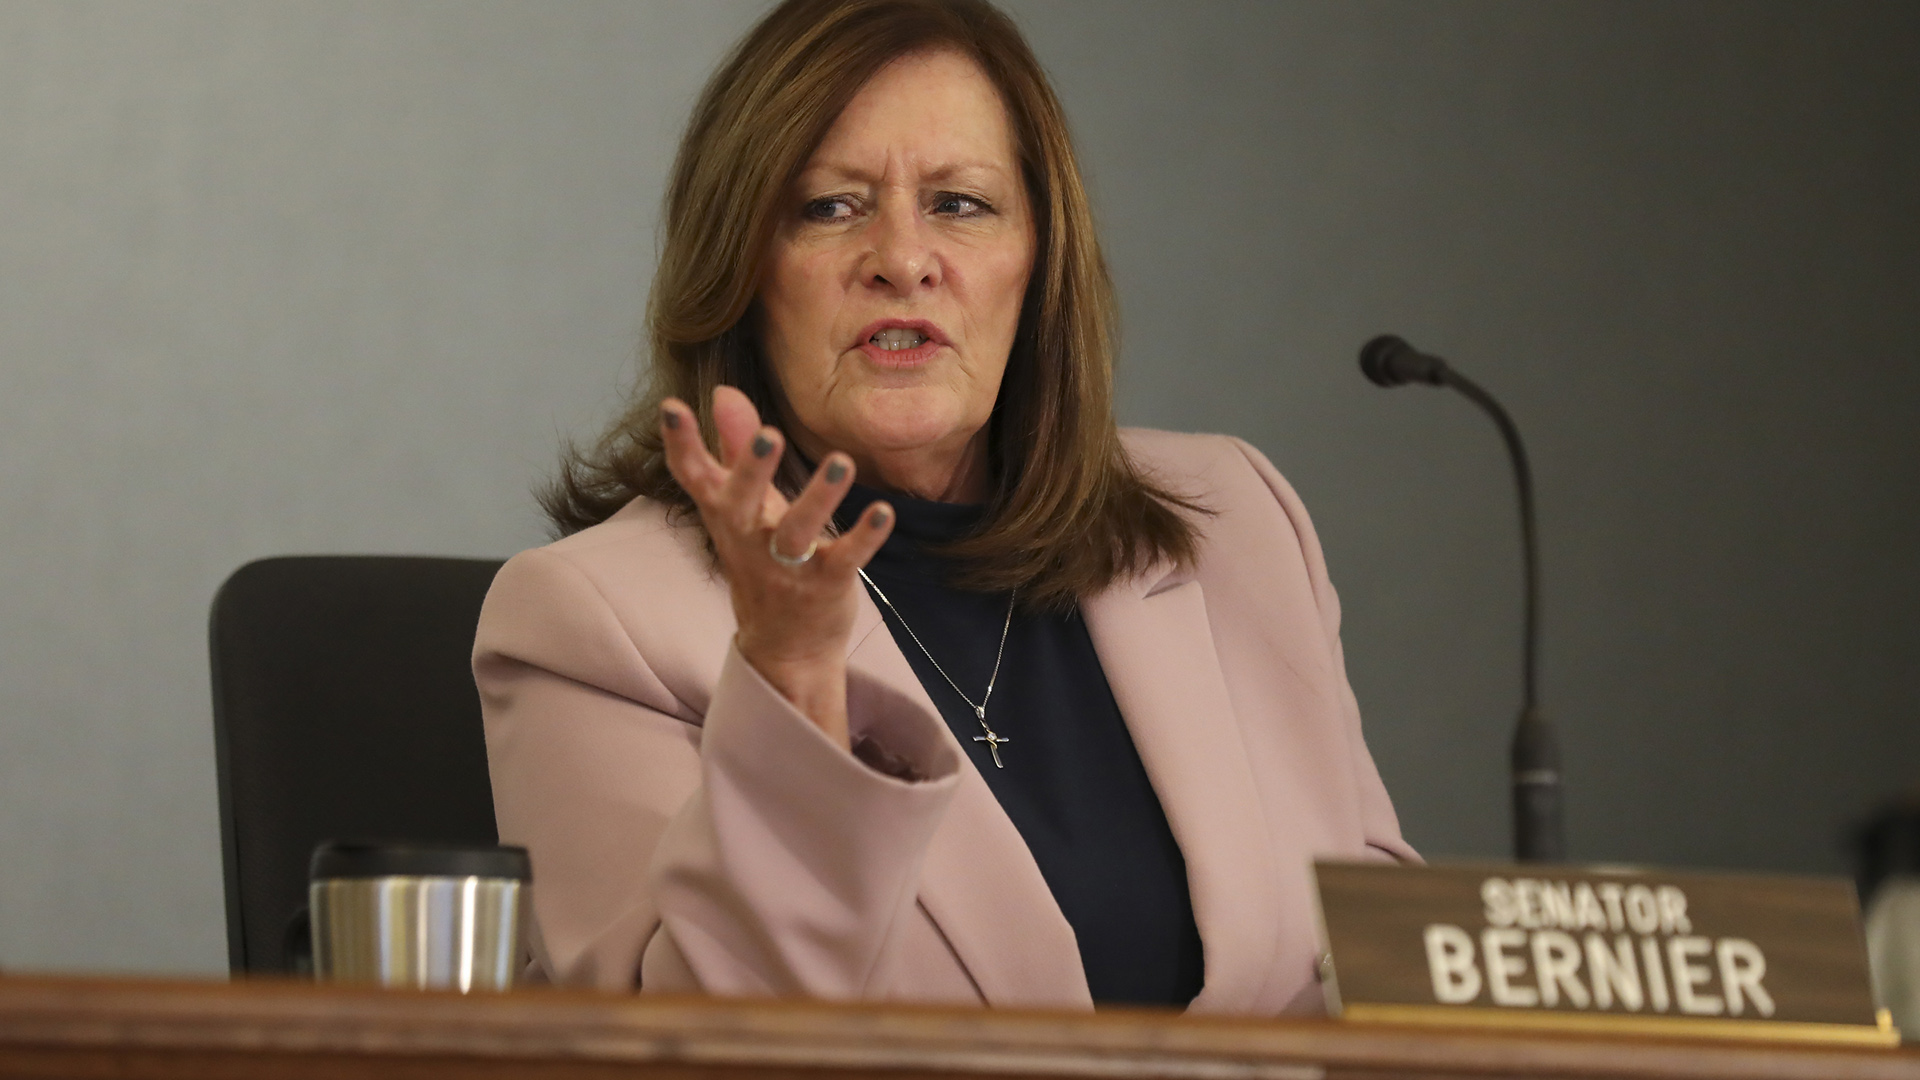 Kathleen Bernier gestures with her right hand while speaking and seated at a table outfitted with a microphone and a desk name plate reading "Senator Bernier."